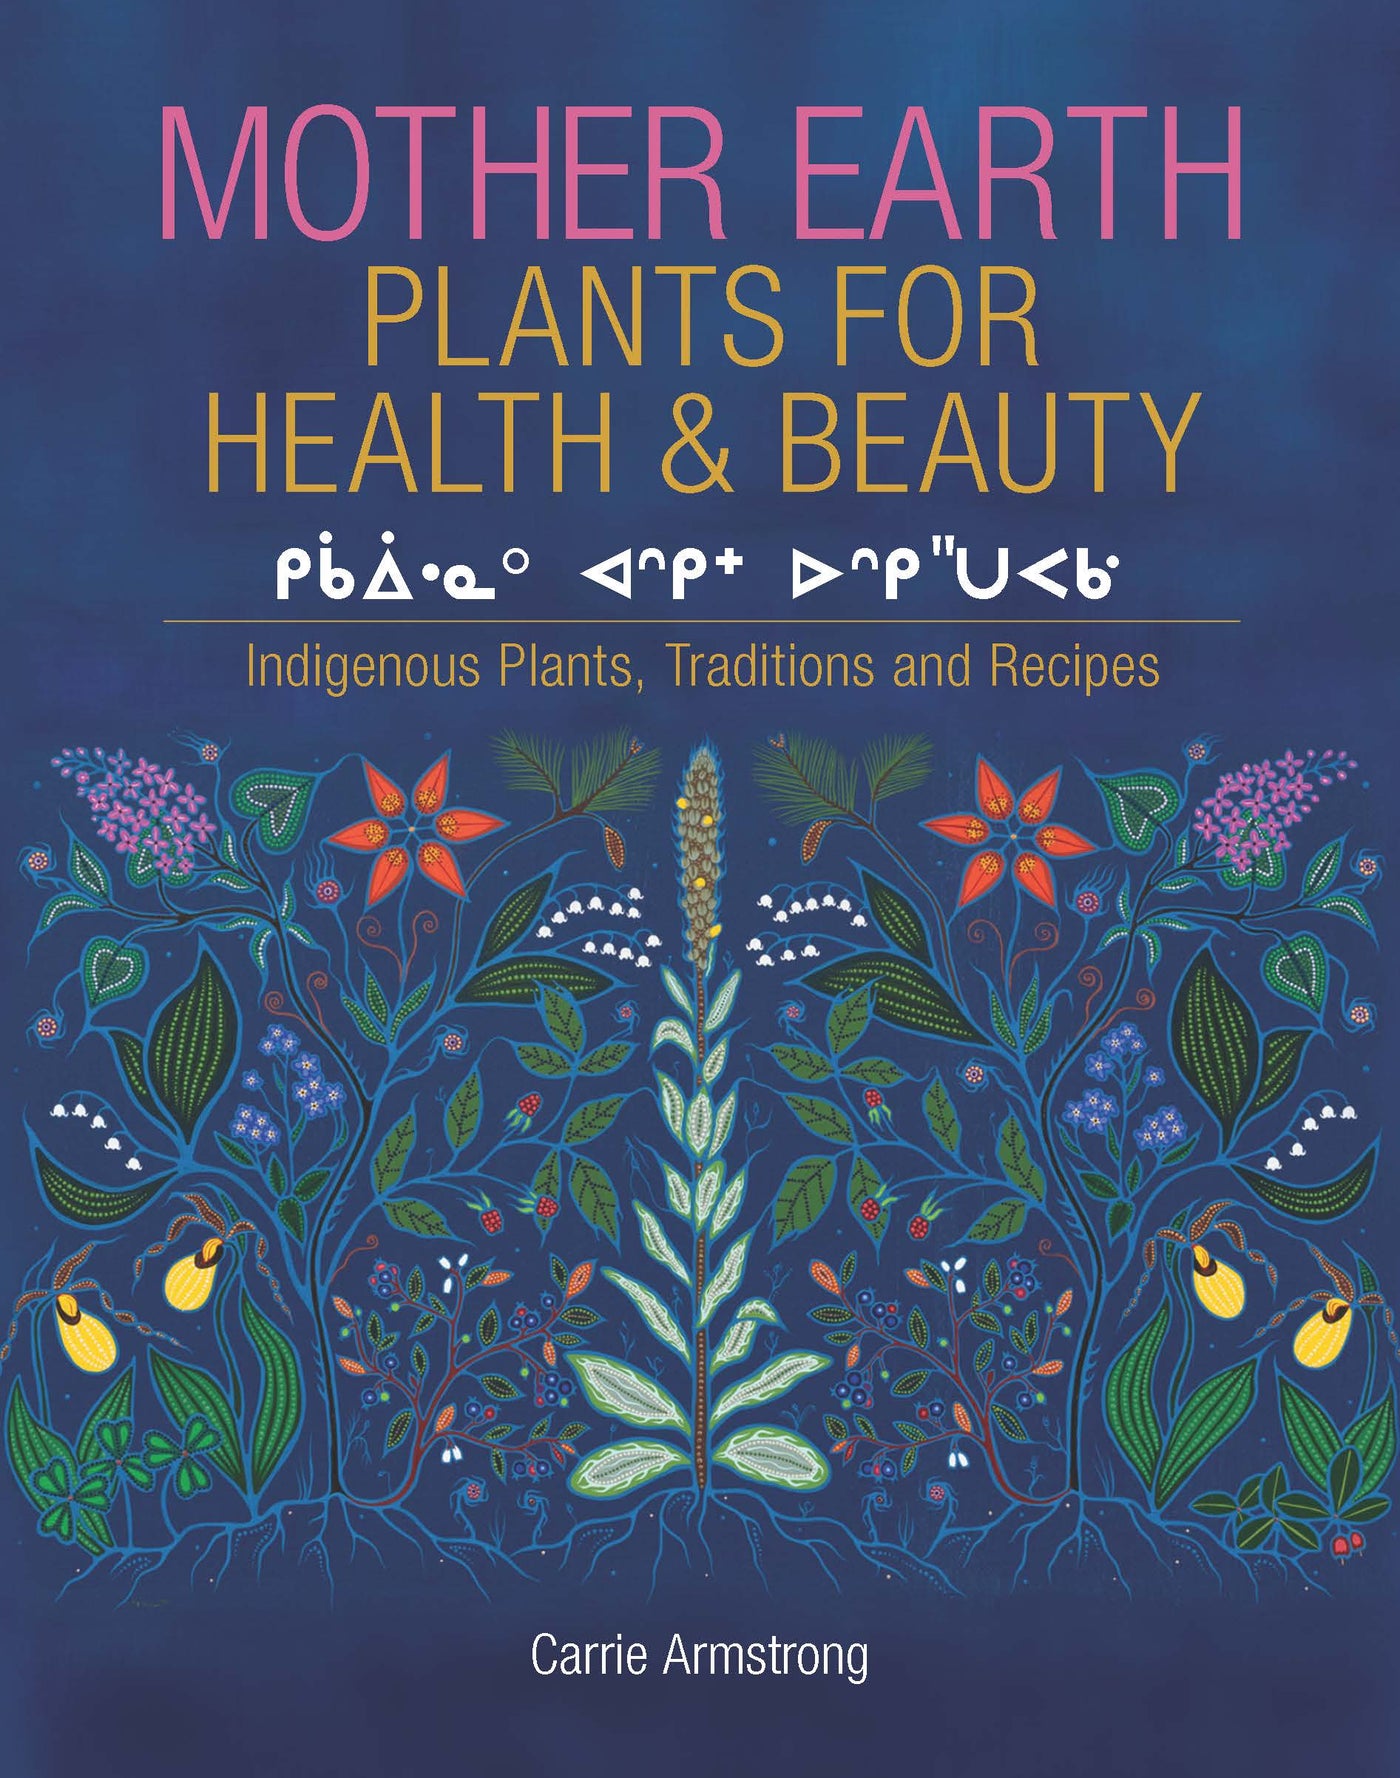 Mother Earth: Plants for Health & Beauty